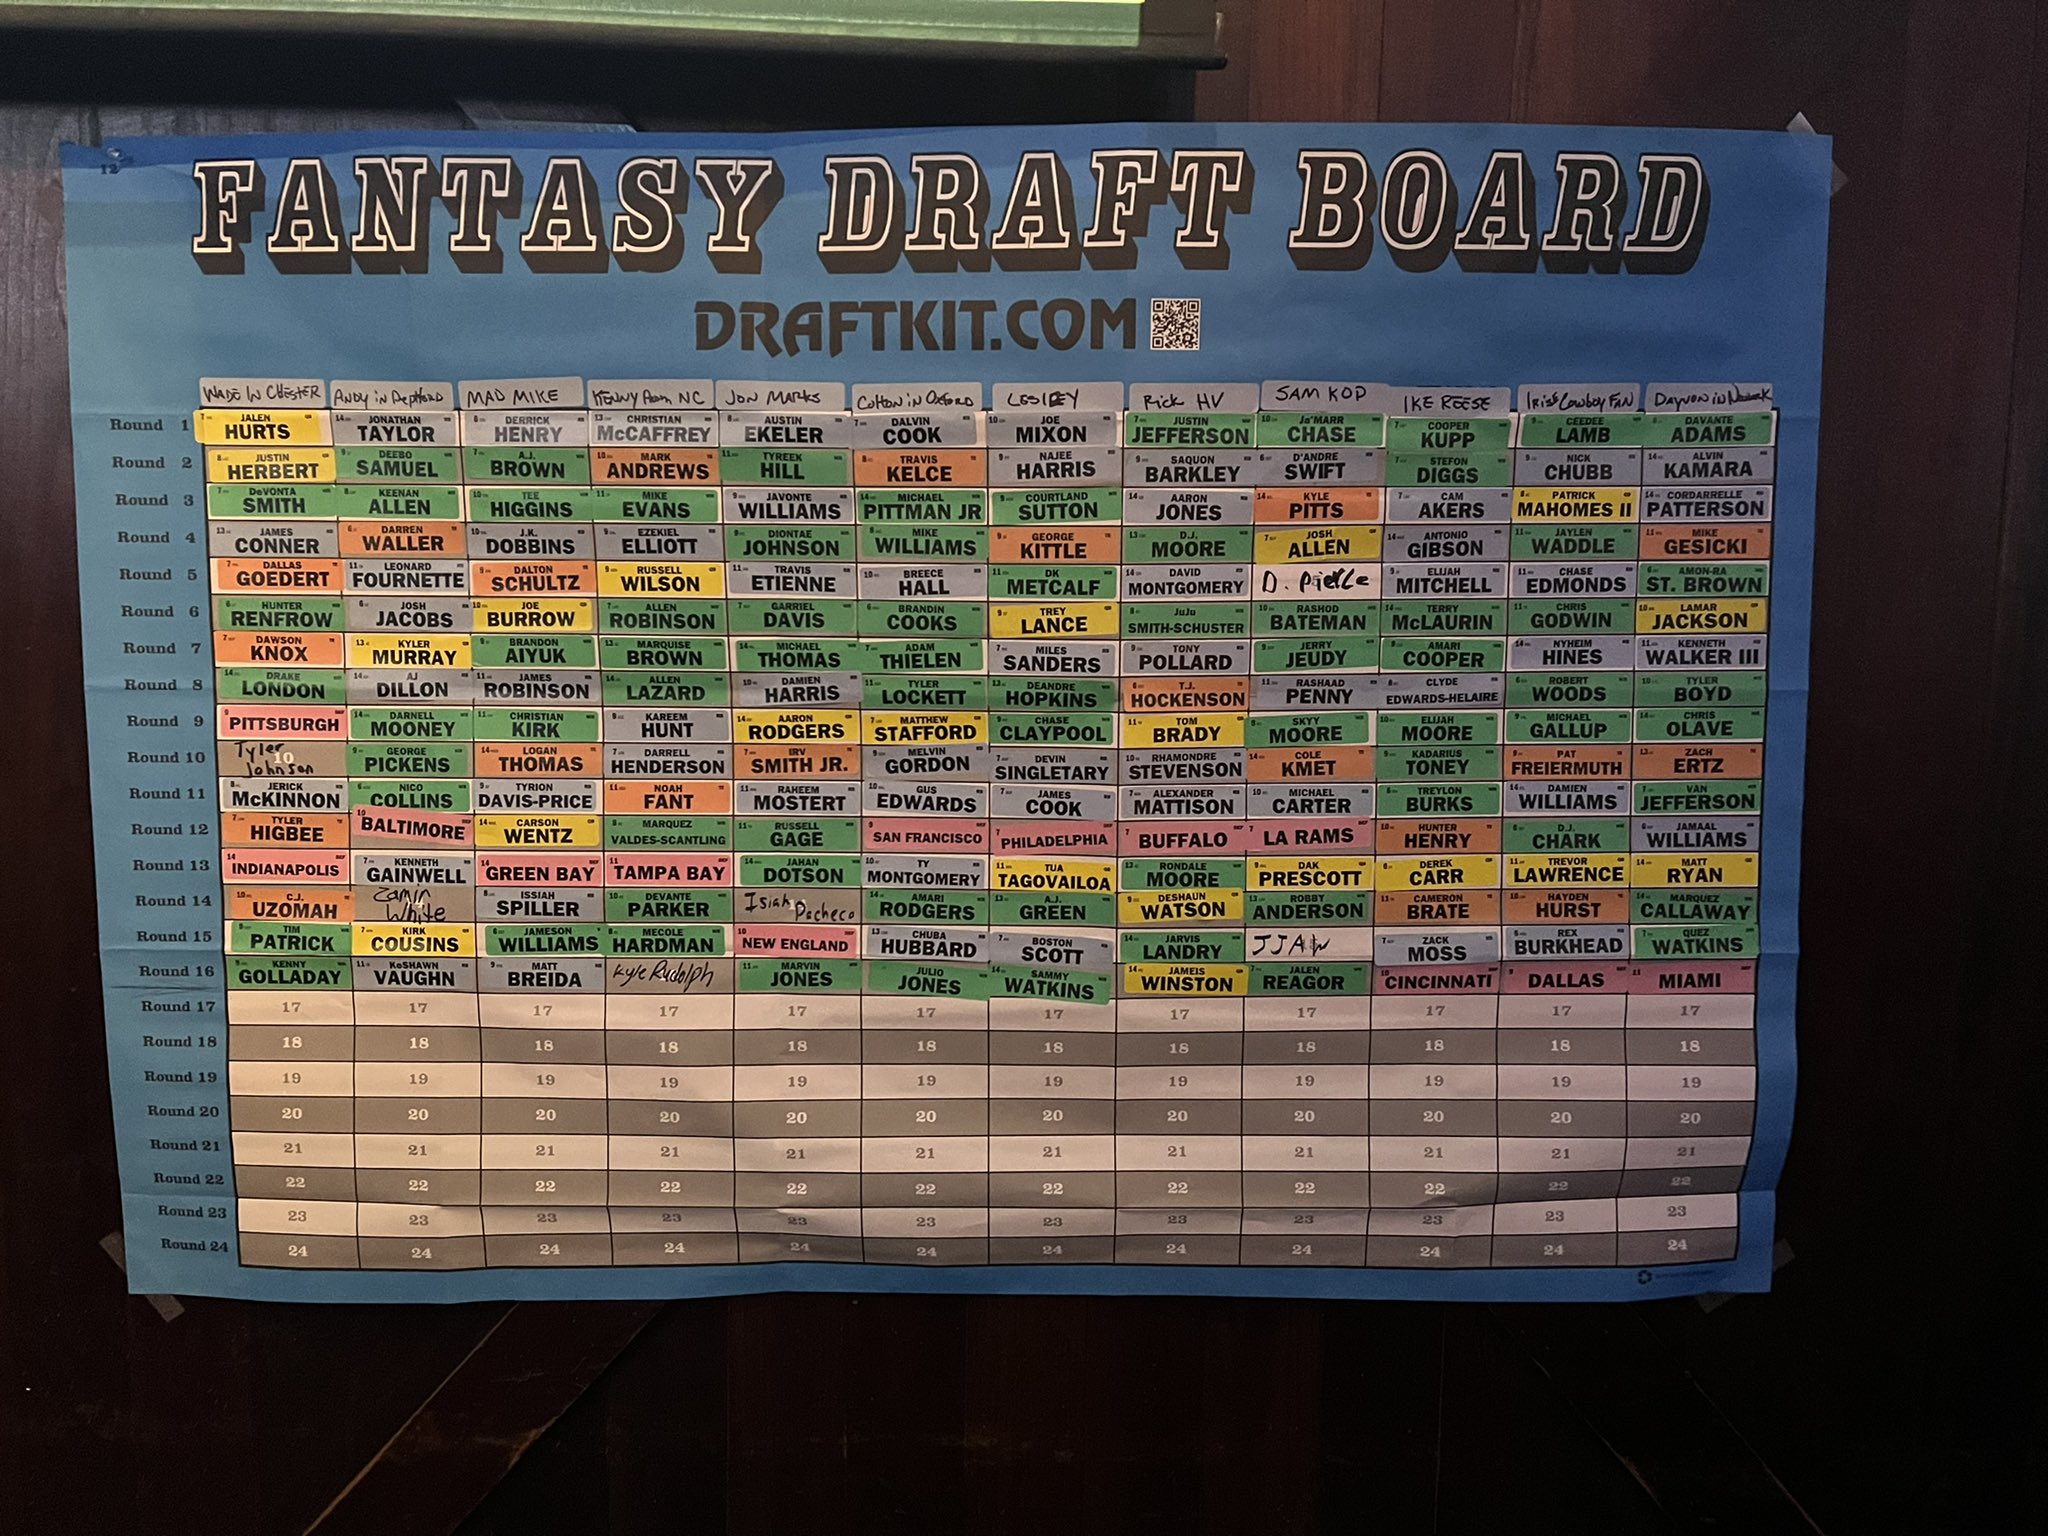 Unfortunately, O.G. Wade had the Worst Fantasy Football Draft of All Time